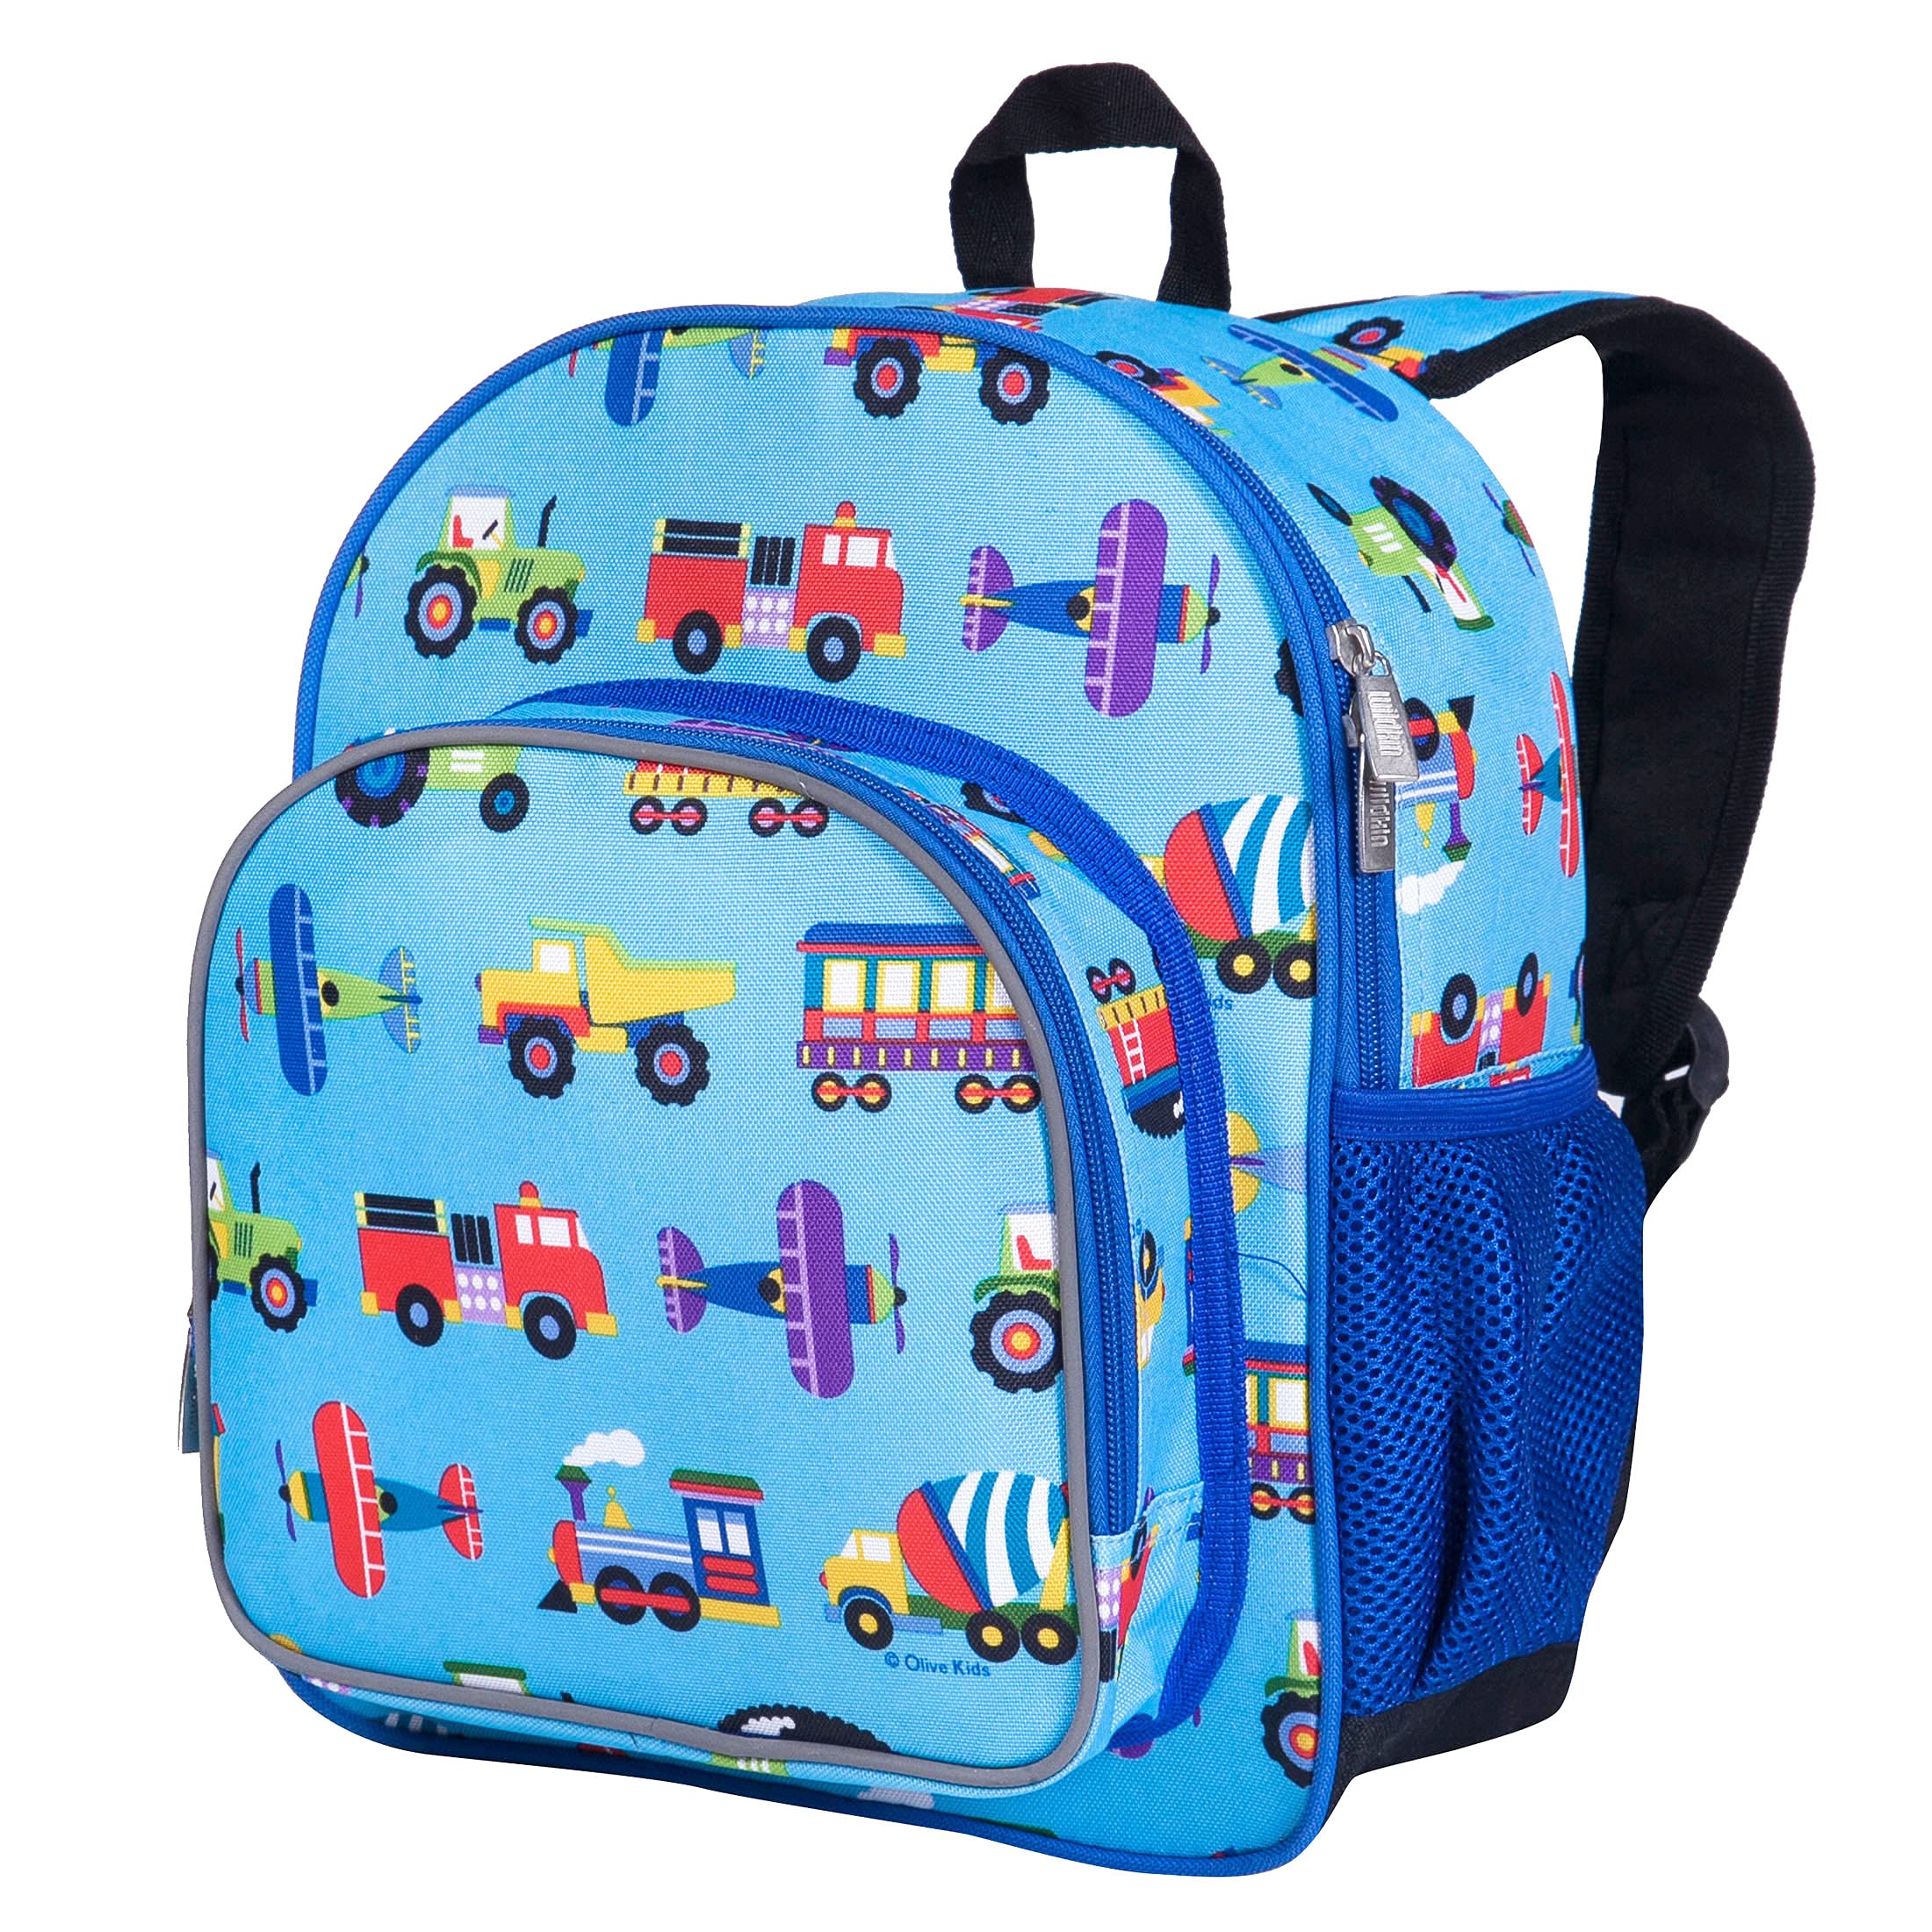 Wildkin 12-Inch Kids Backpack for Boys & Girls, Perfect for